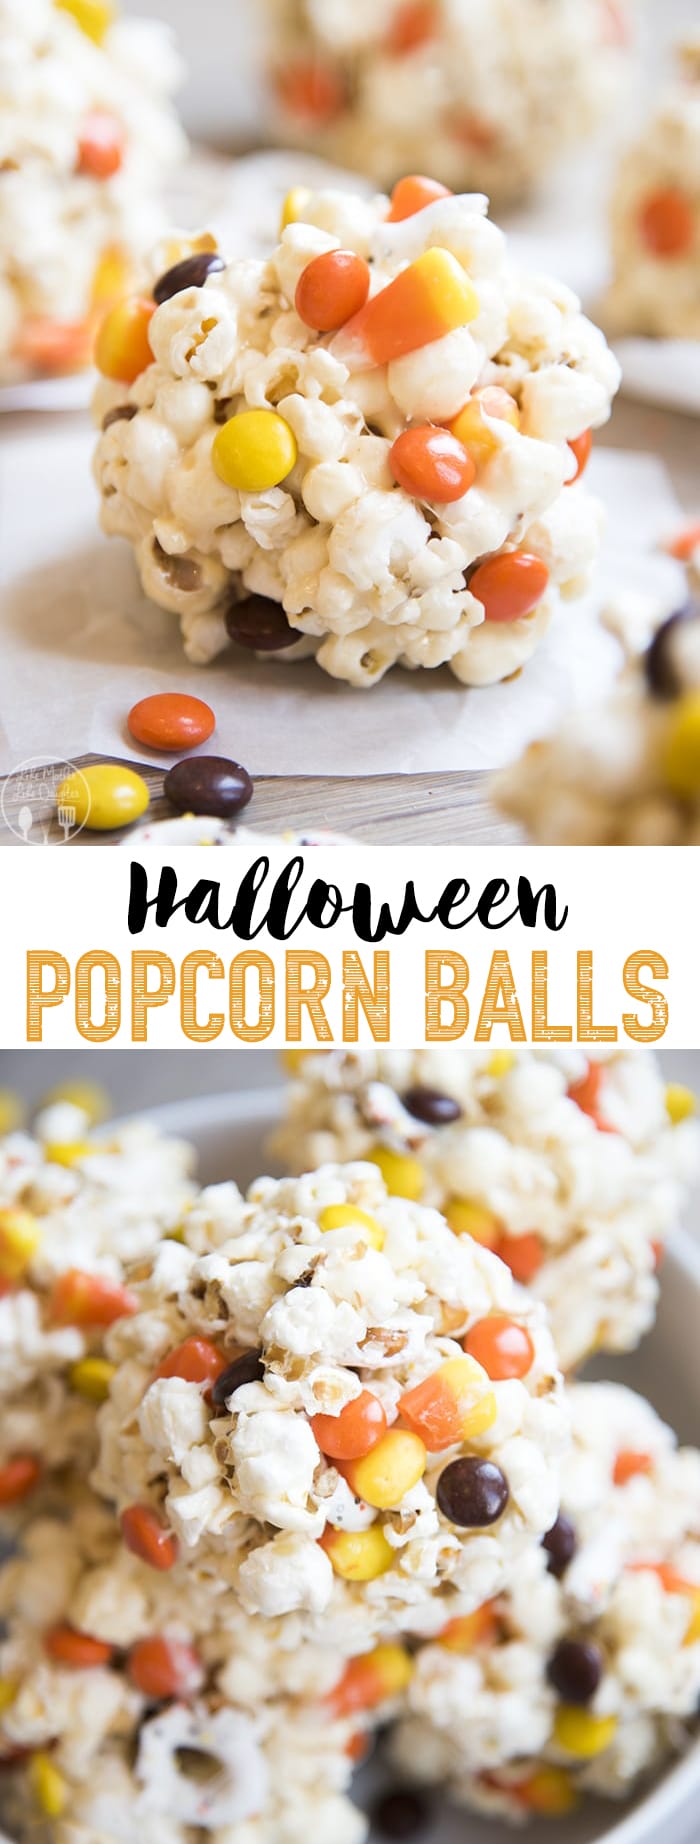 A collage of two photos of Halloween popcorn balls with a text block in the middle.